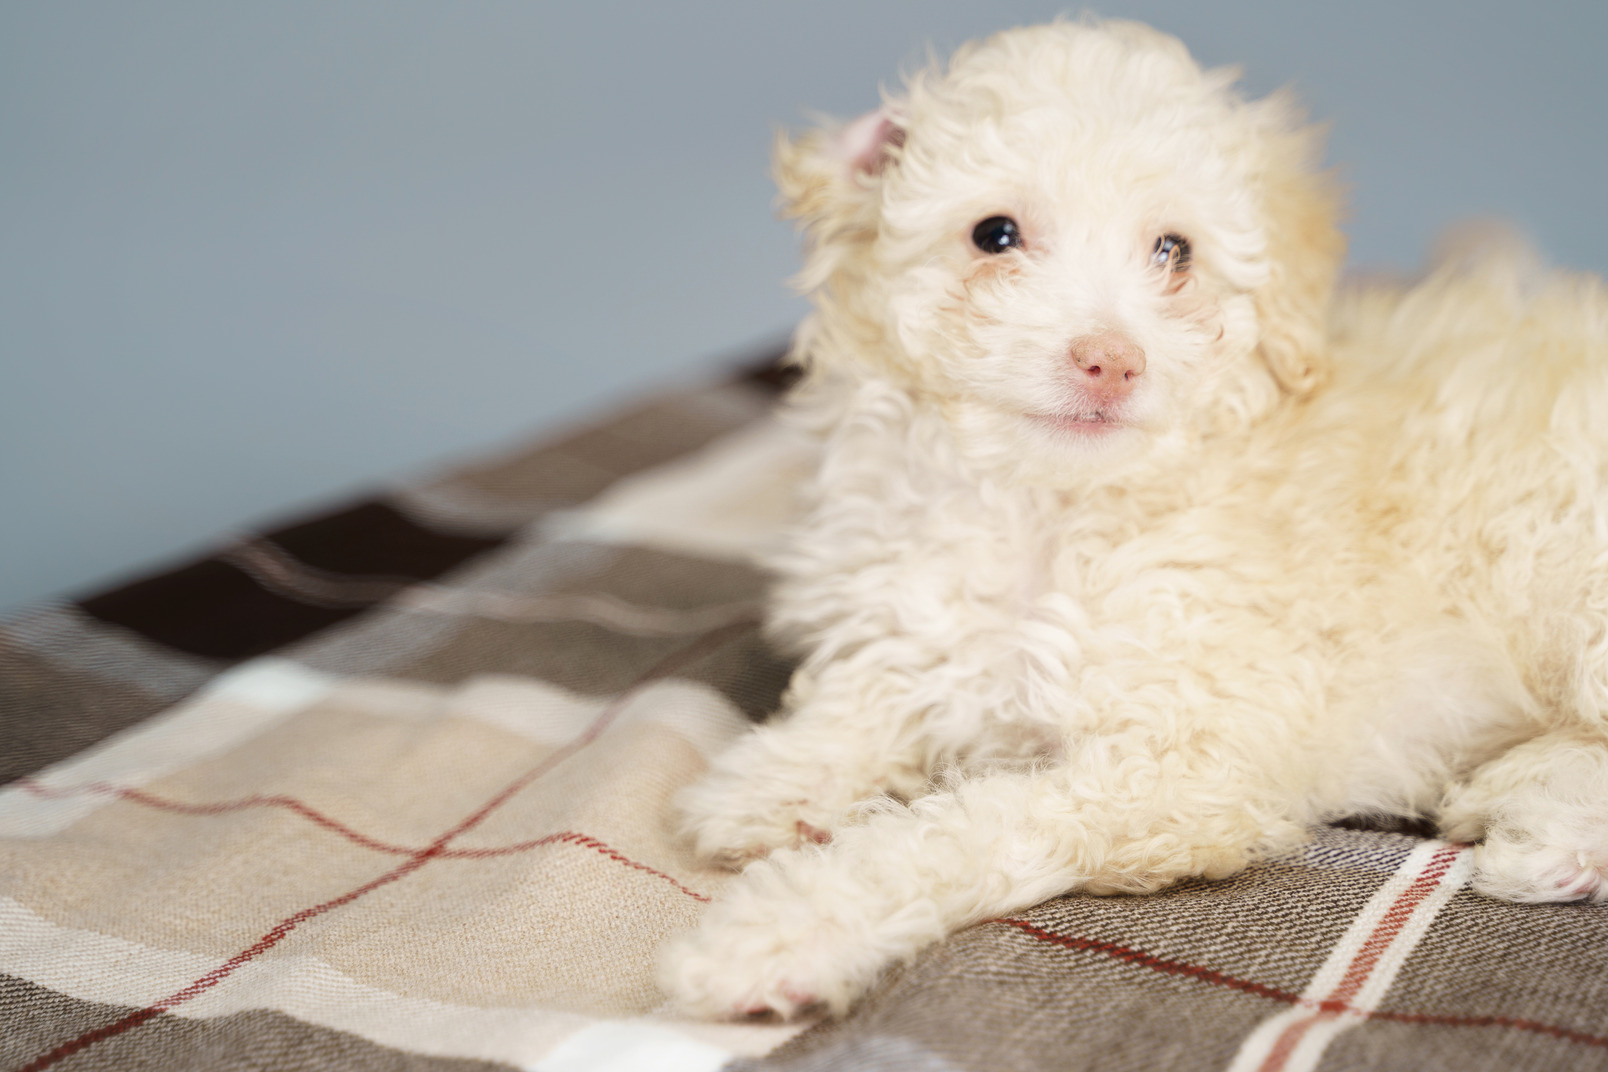 Full-length of a tiny puppy lying on a checked blanket and looking at camera